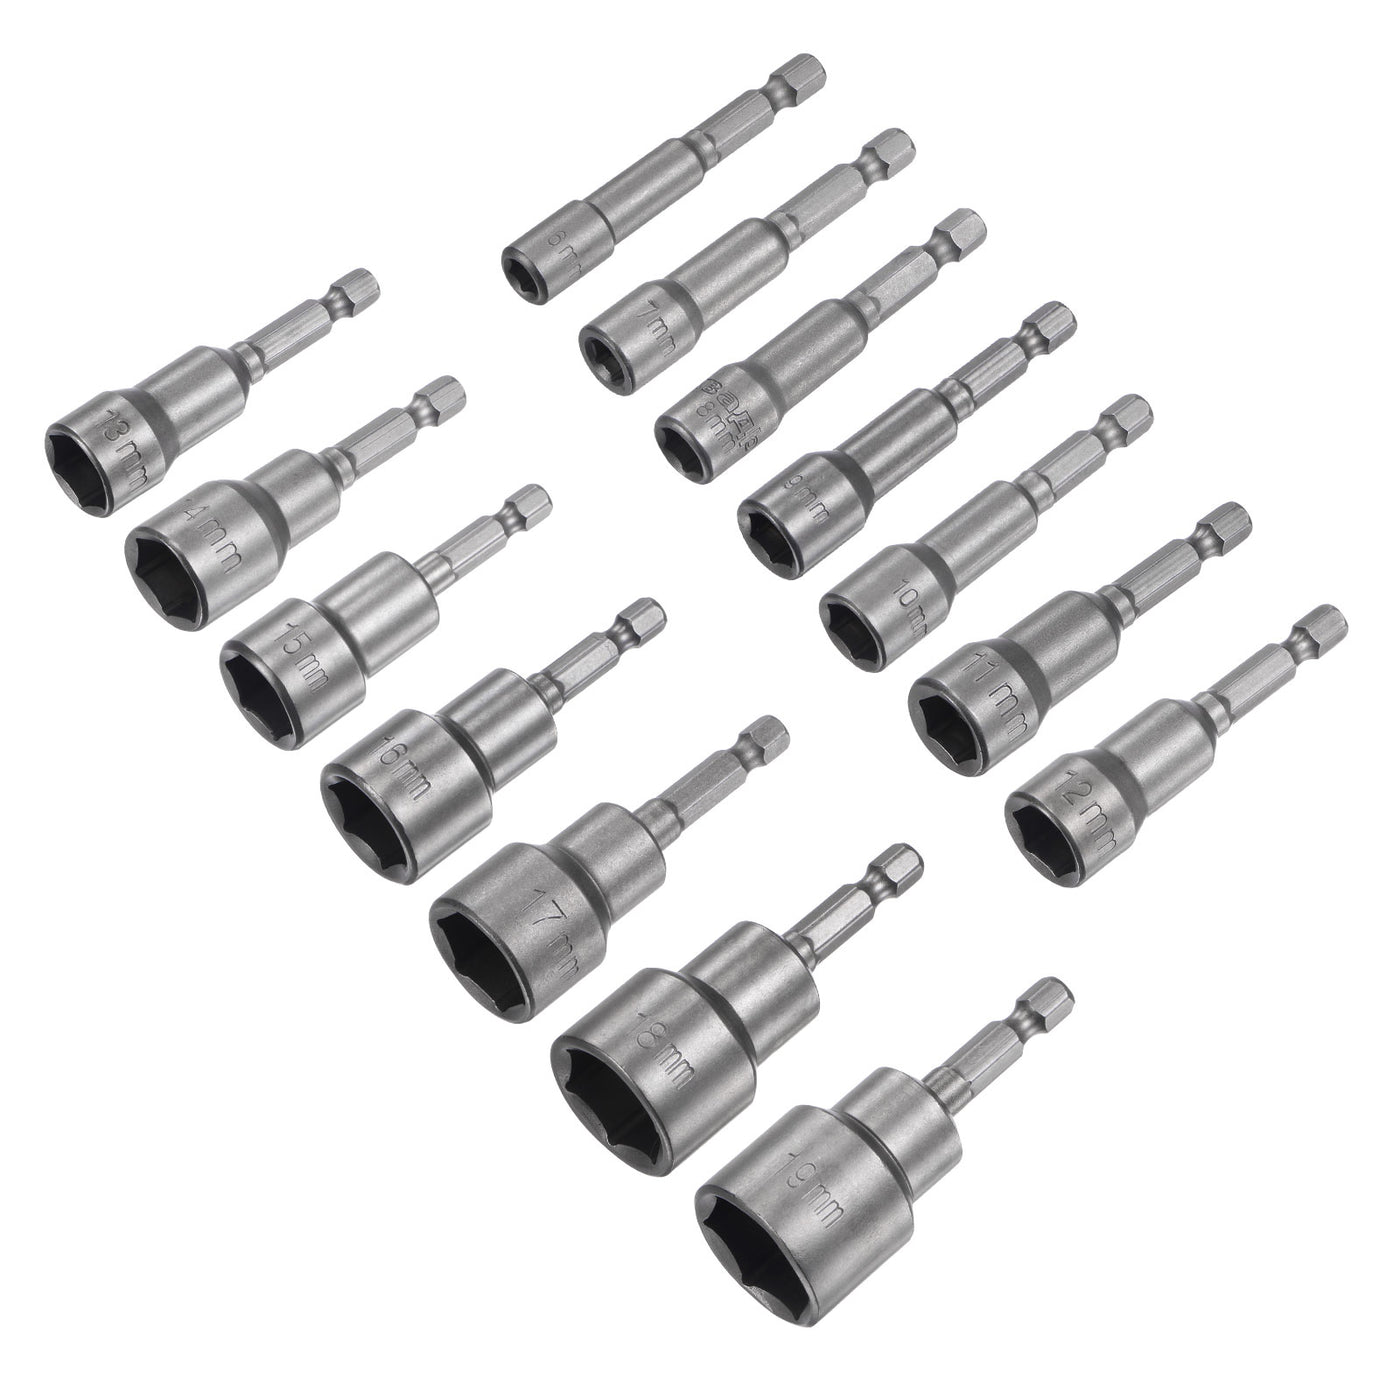 uxcell Uxcell 1/4" Quick-Change Hex Shank 6-19mm Magnetic Nut Driver Bit Set of 14 Piece, CR-V